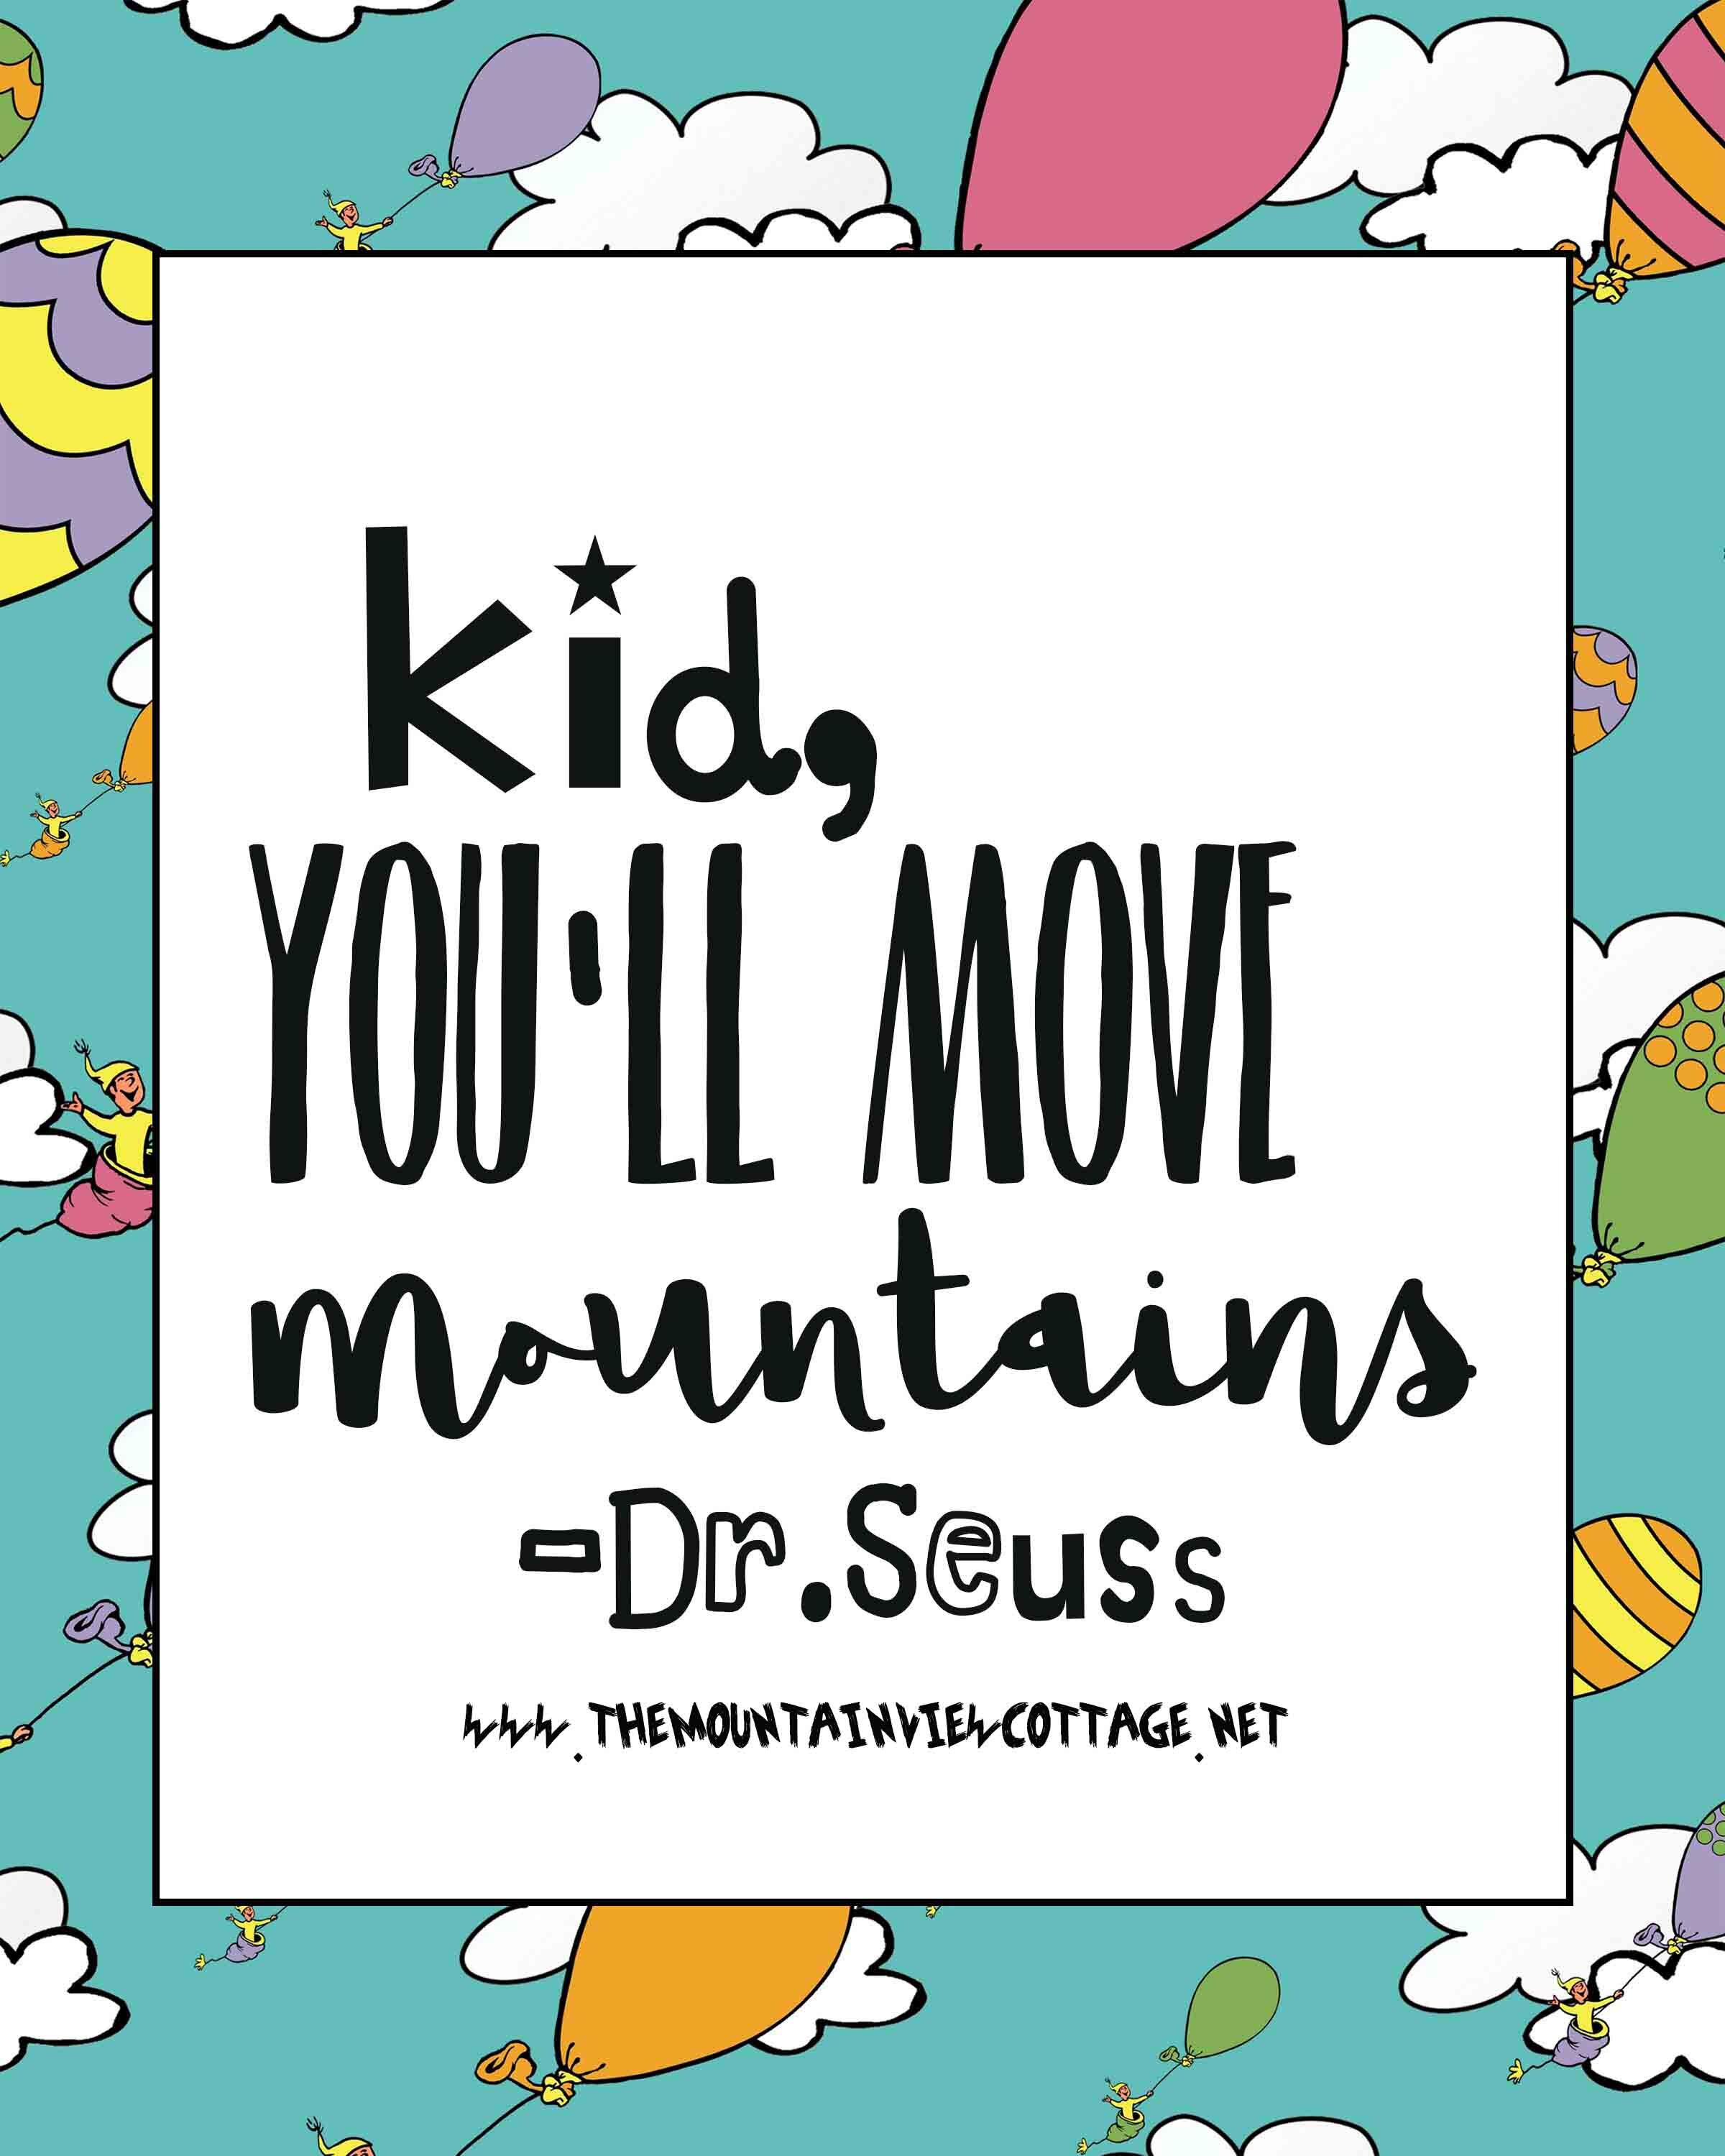 Dr.Seuss-Quotes-kid-youll-move-mountains-1.jpg